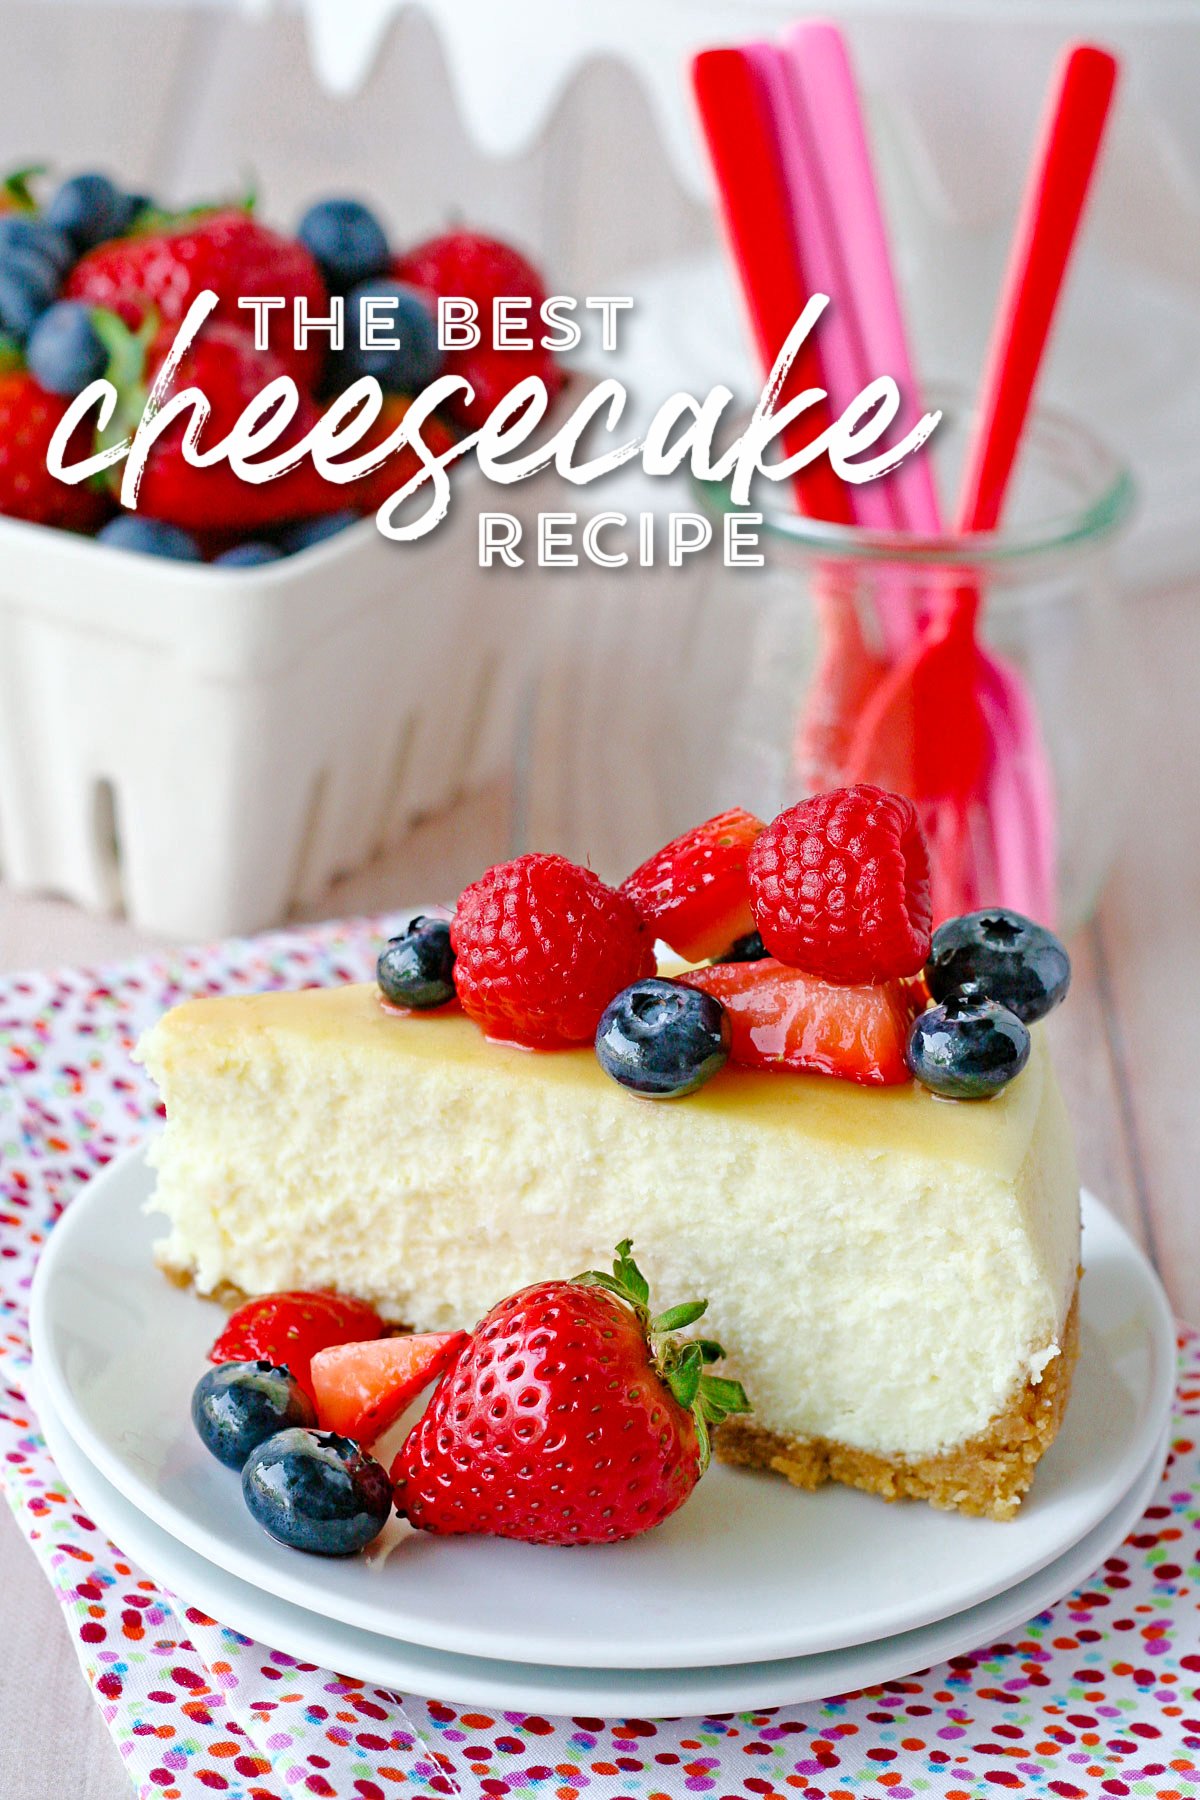 slice of cheesecake on white plate topped with fresh berries. title overlay at top of image.